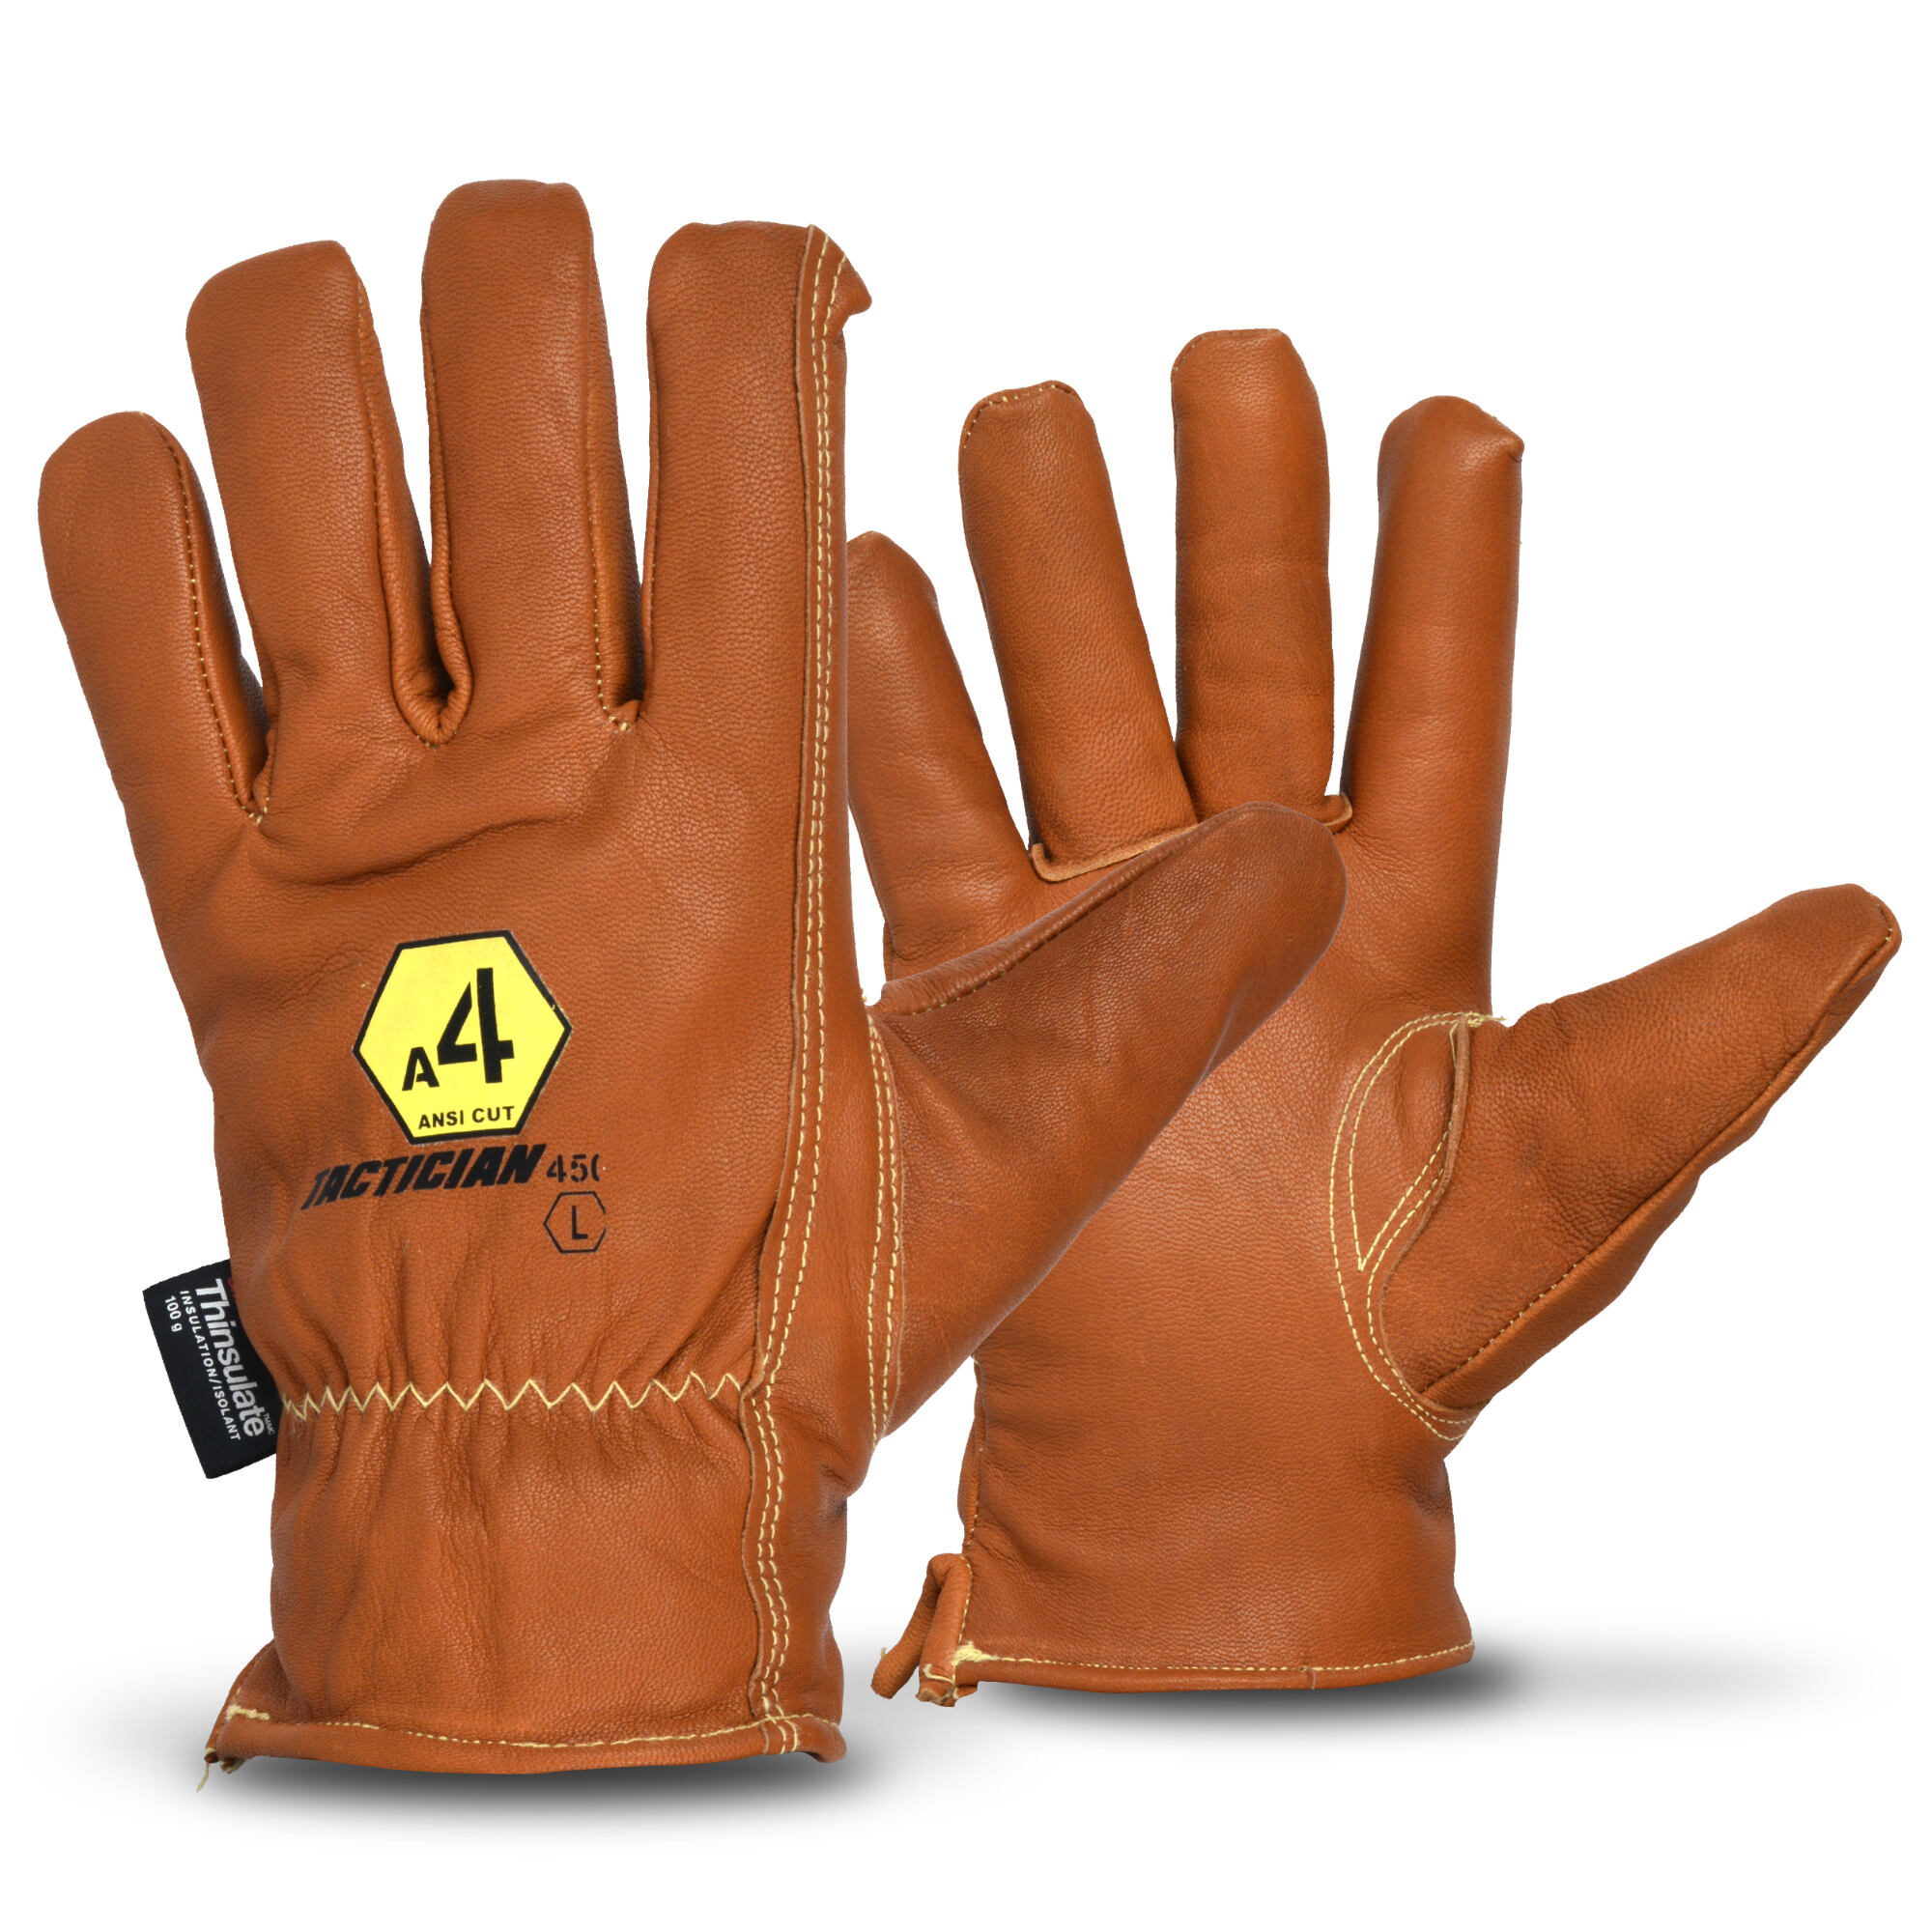 Truline Tactician A4 Cut protection glove